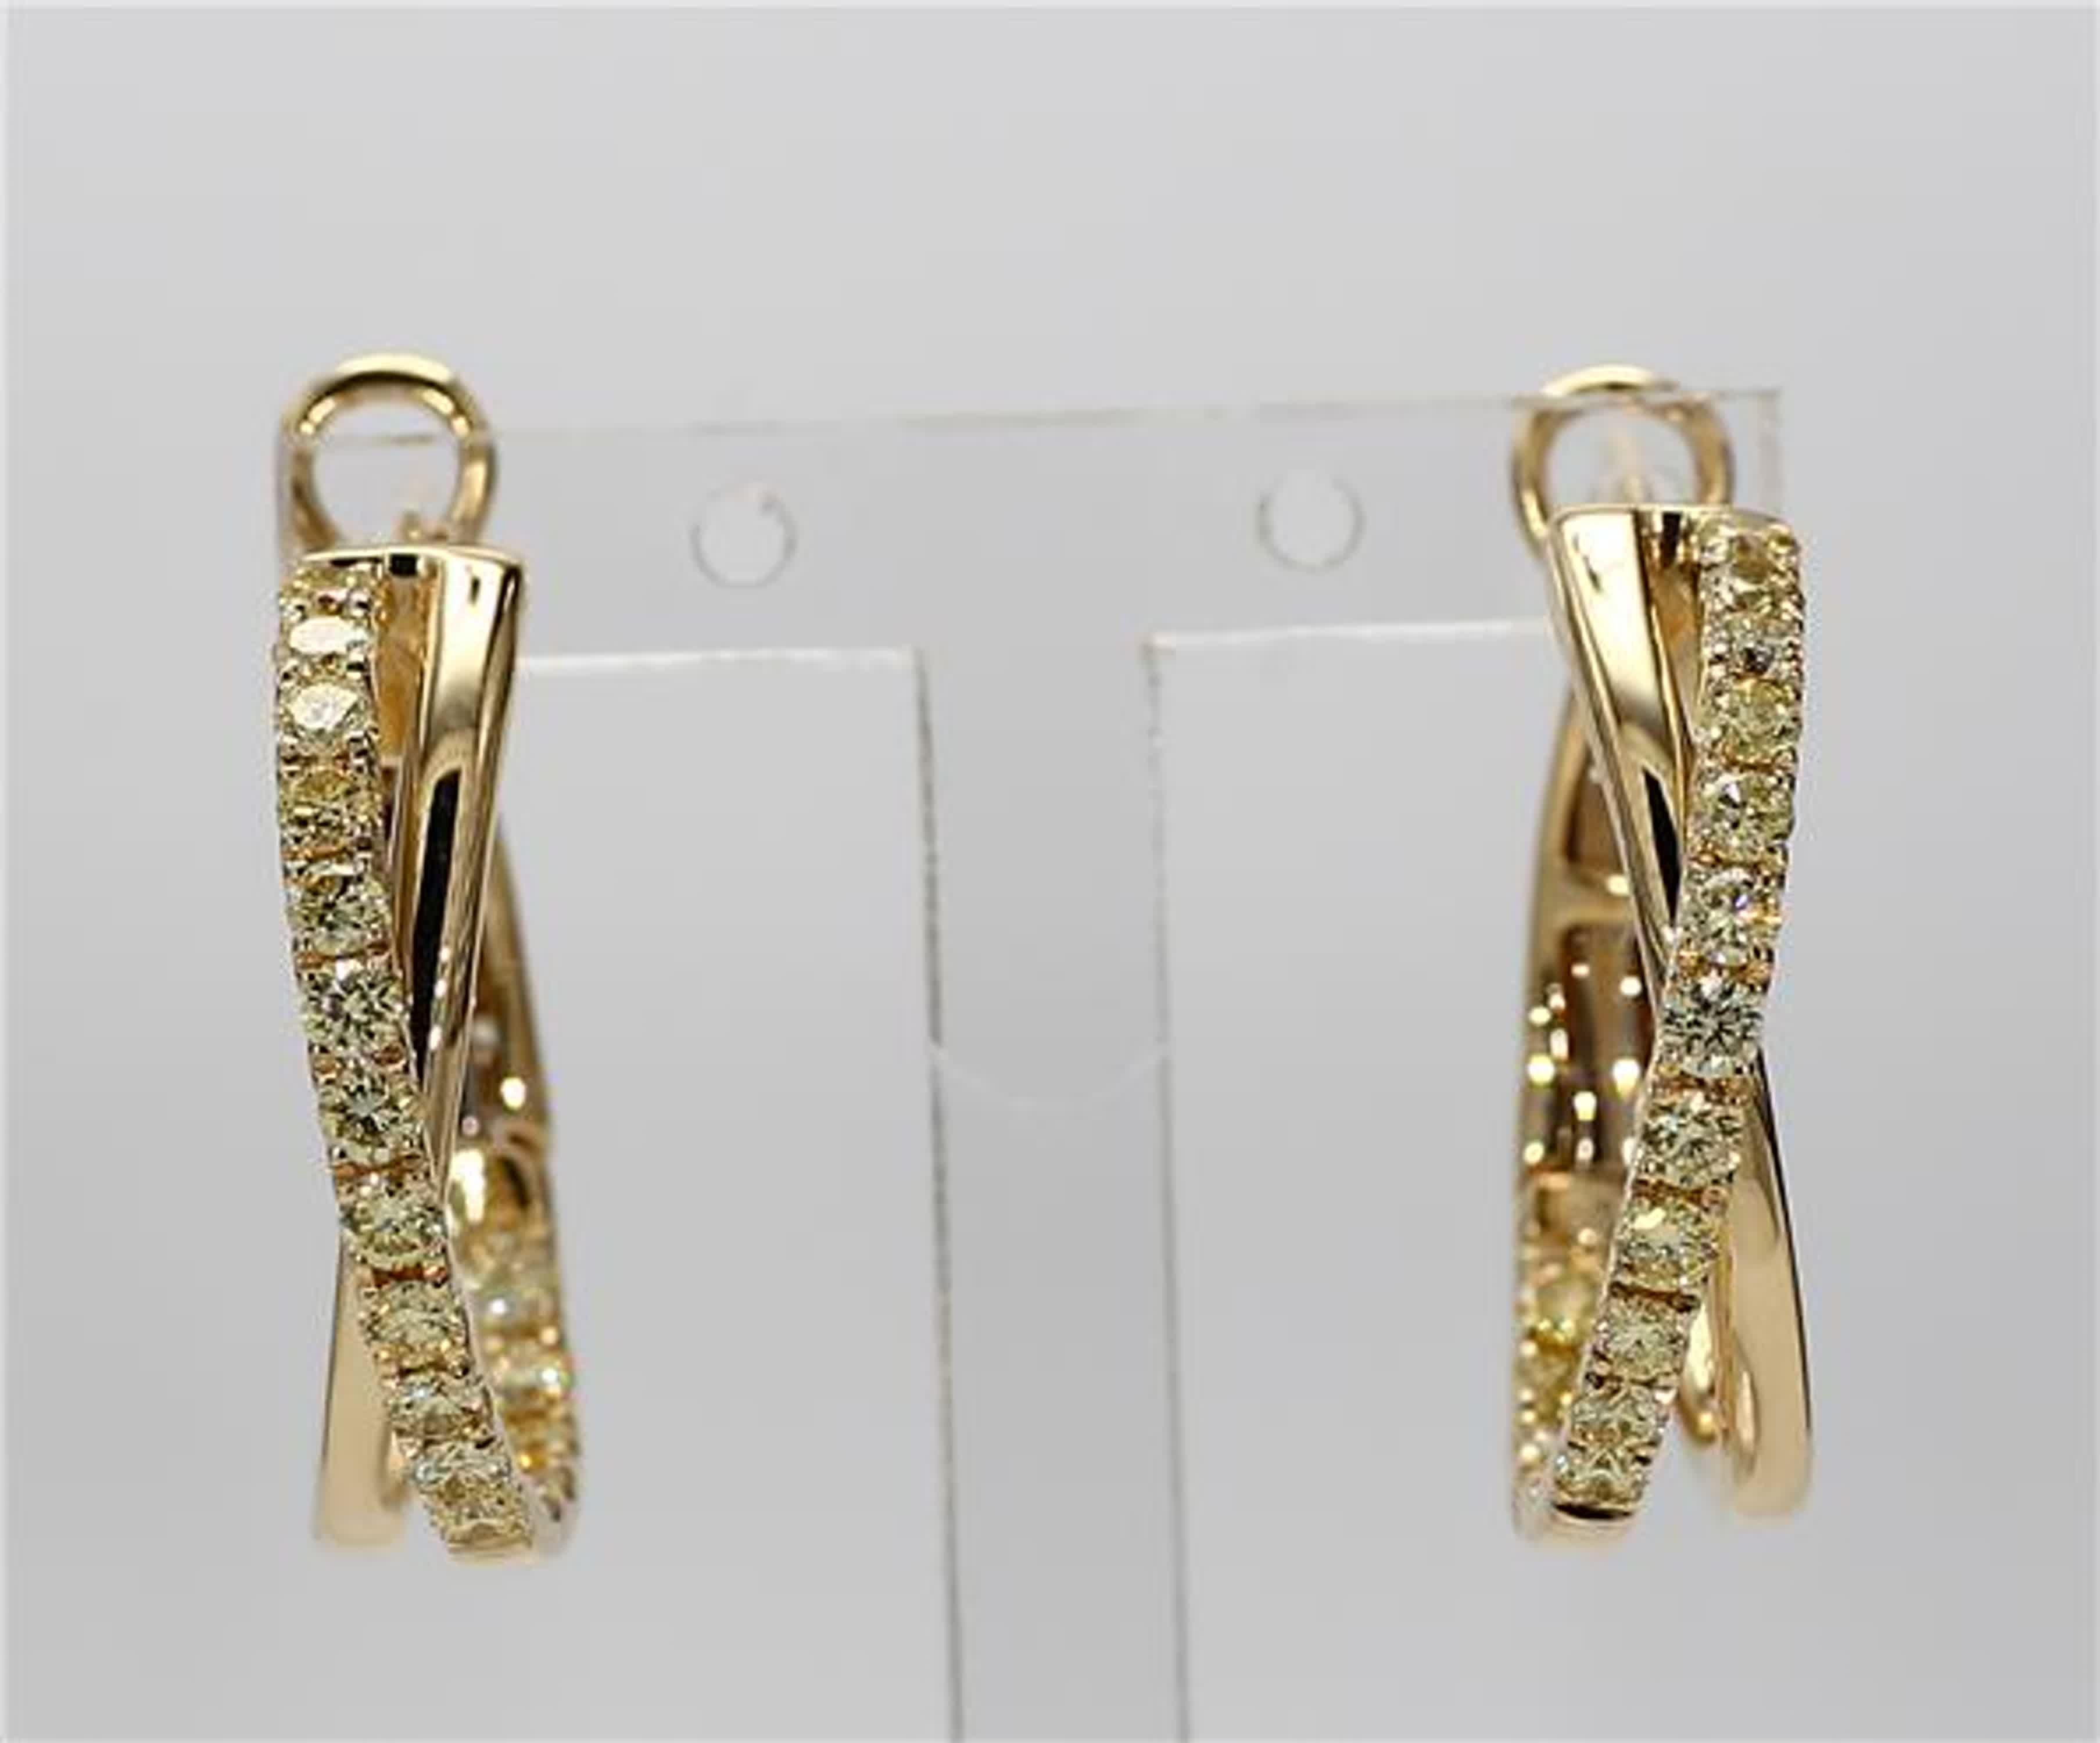 RareGemWorld's classic diamond earrings. Mounted in a beautiful 18K Yellow Gold setting with natural round cut yellow diamonds. These earrings are guaranteed to impress and enhance your personal collection!

Total Weight: .96cts

Length x Width: